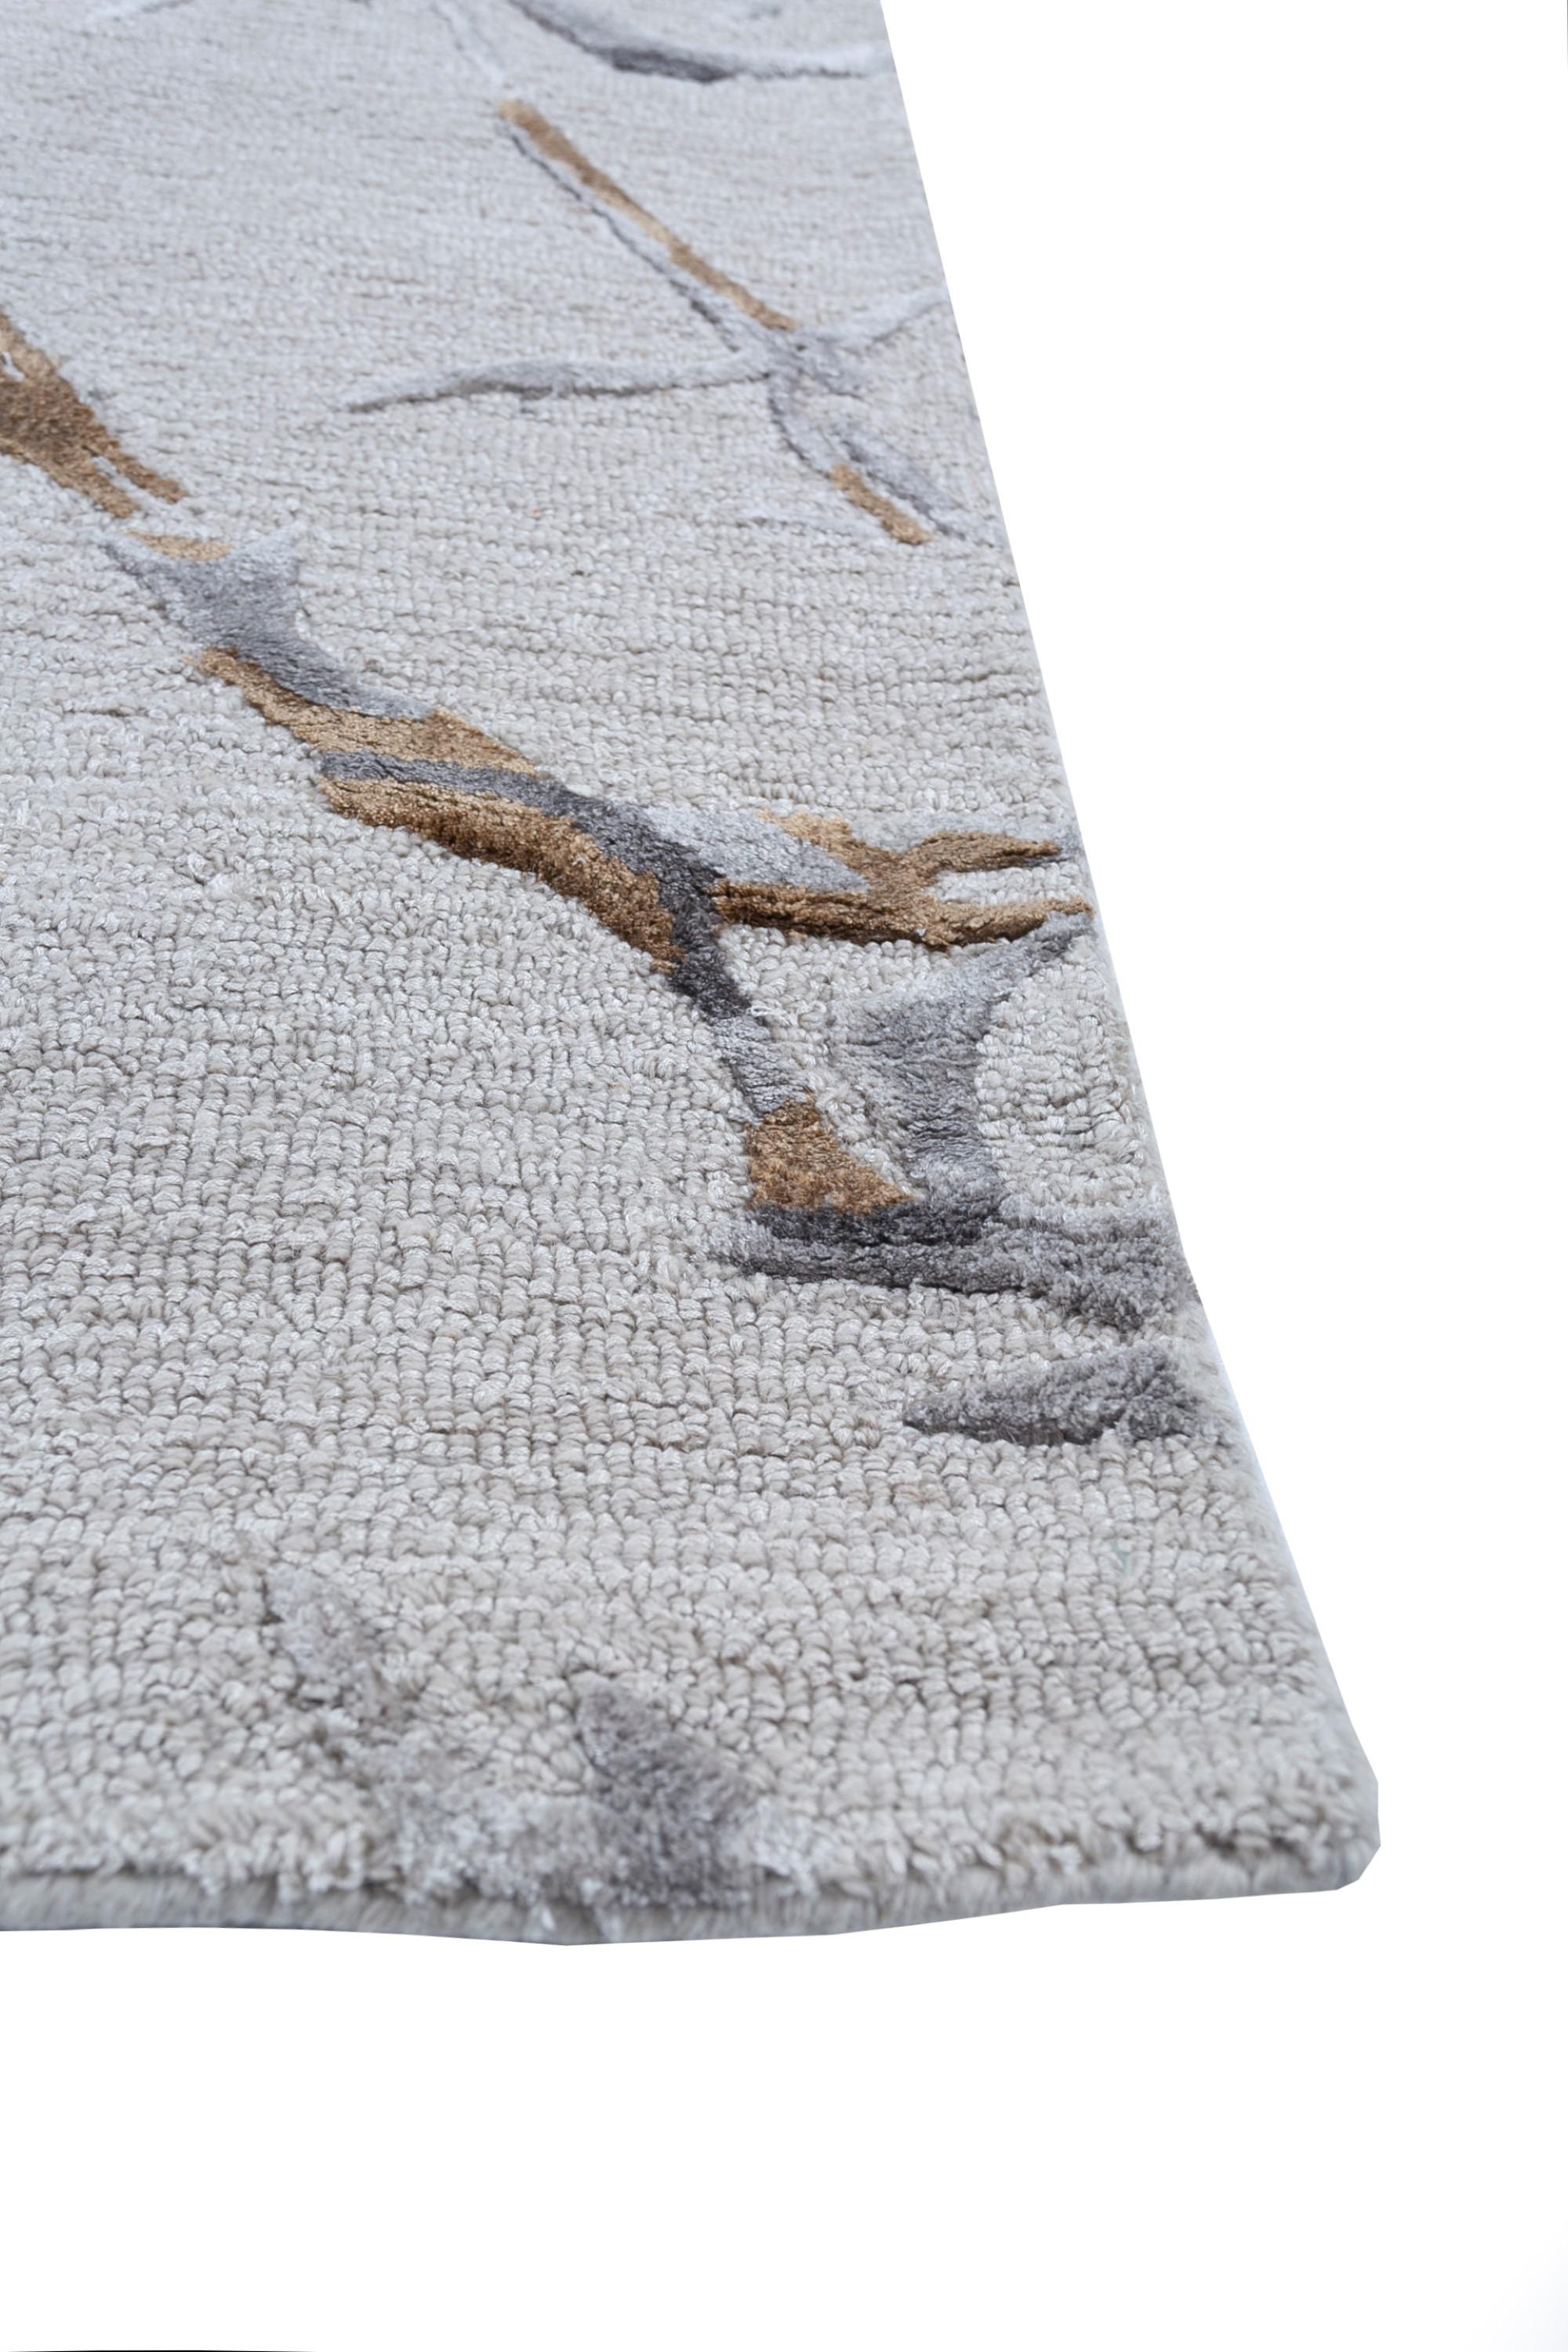 Indulge in luxury in the most comfortable way with this hand tufted wood rug from our Genesis collection. The color palette of antique white and warm spice doesn't just decorate, it displays class, making your room look rich without a hint of